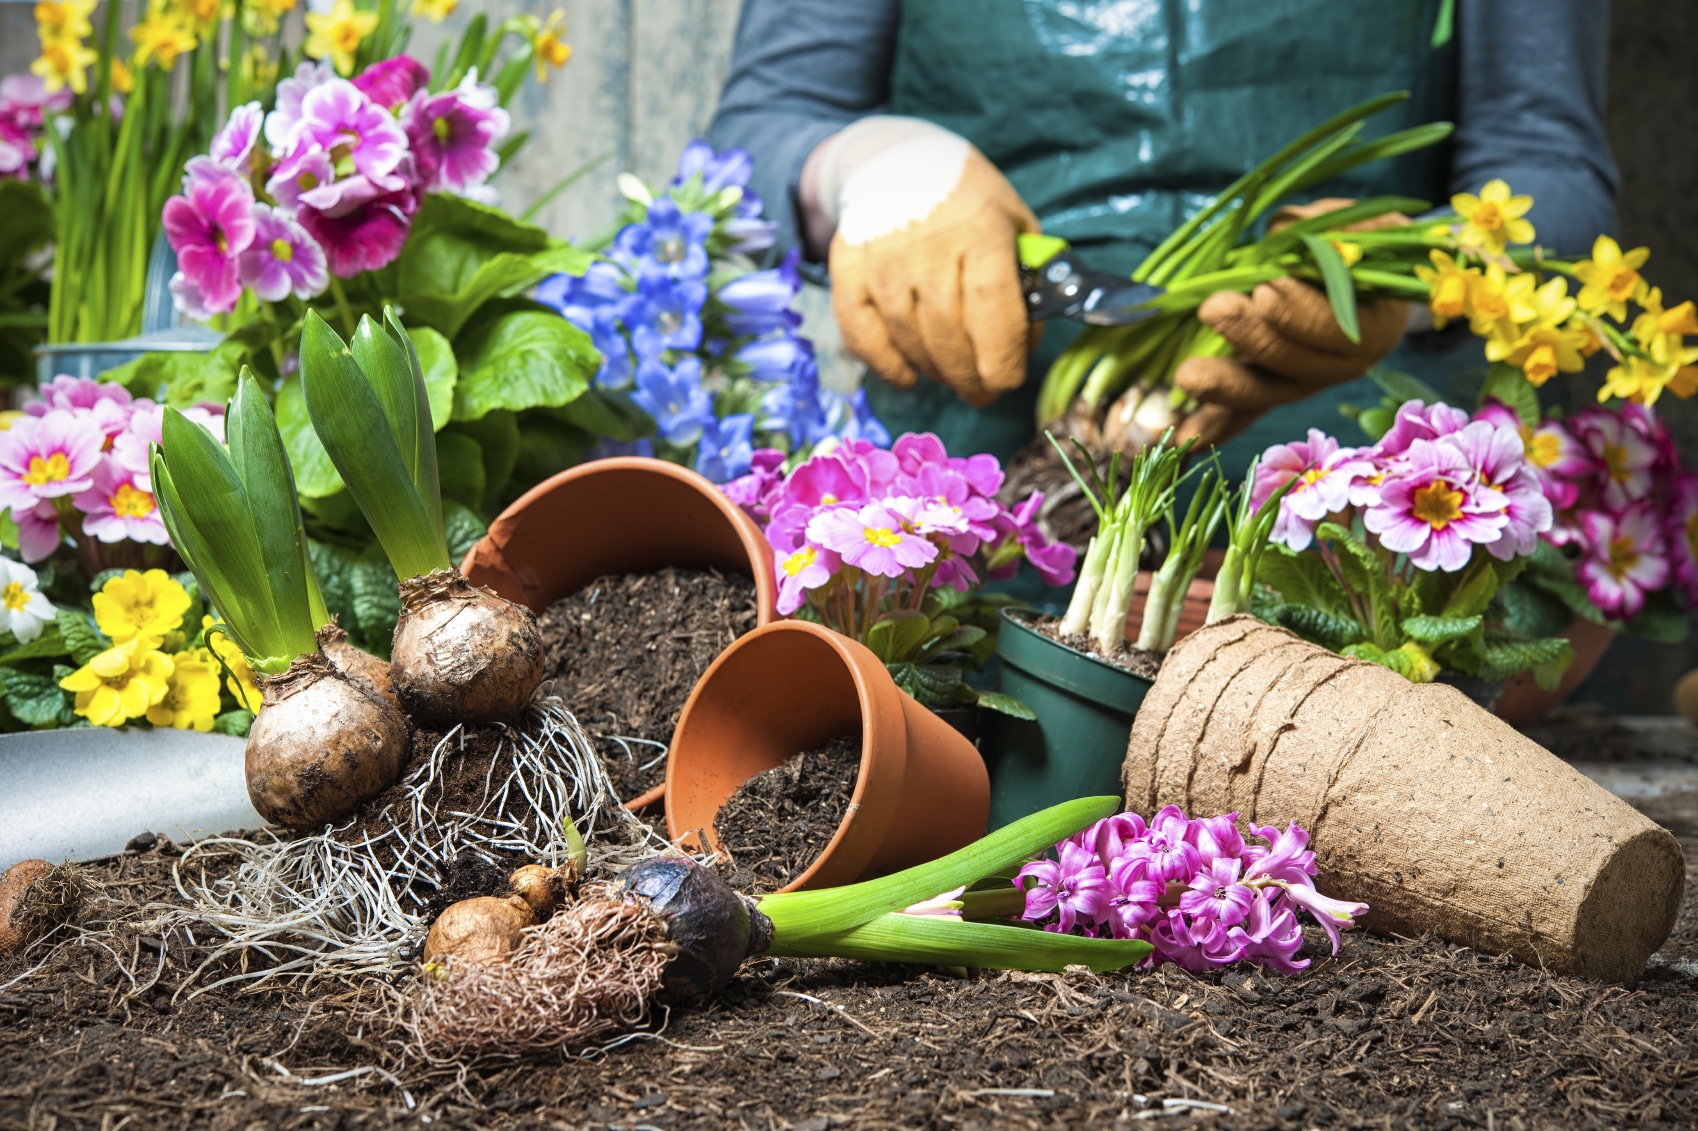 Here’s What You Need to Know About Gardening